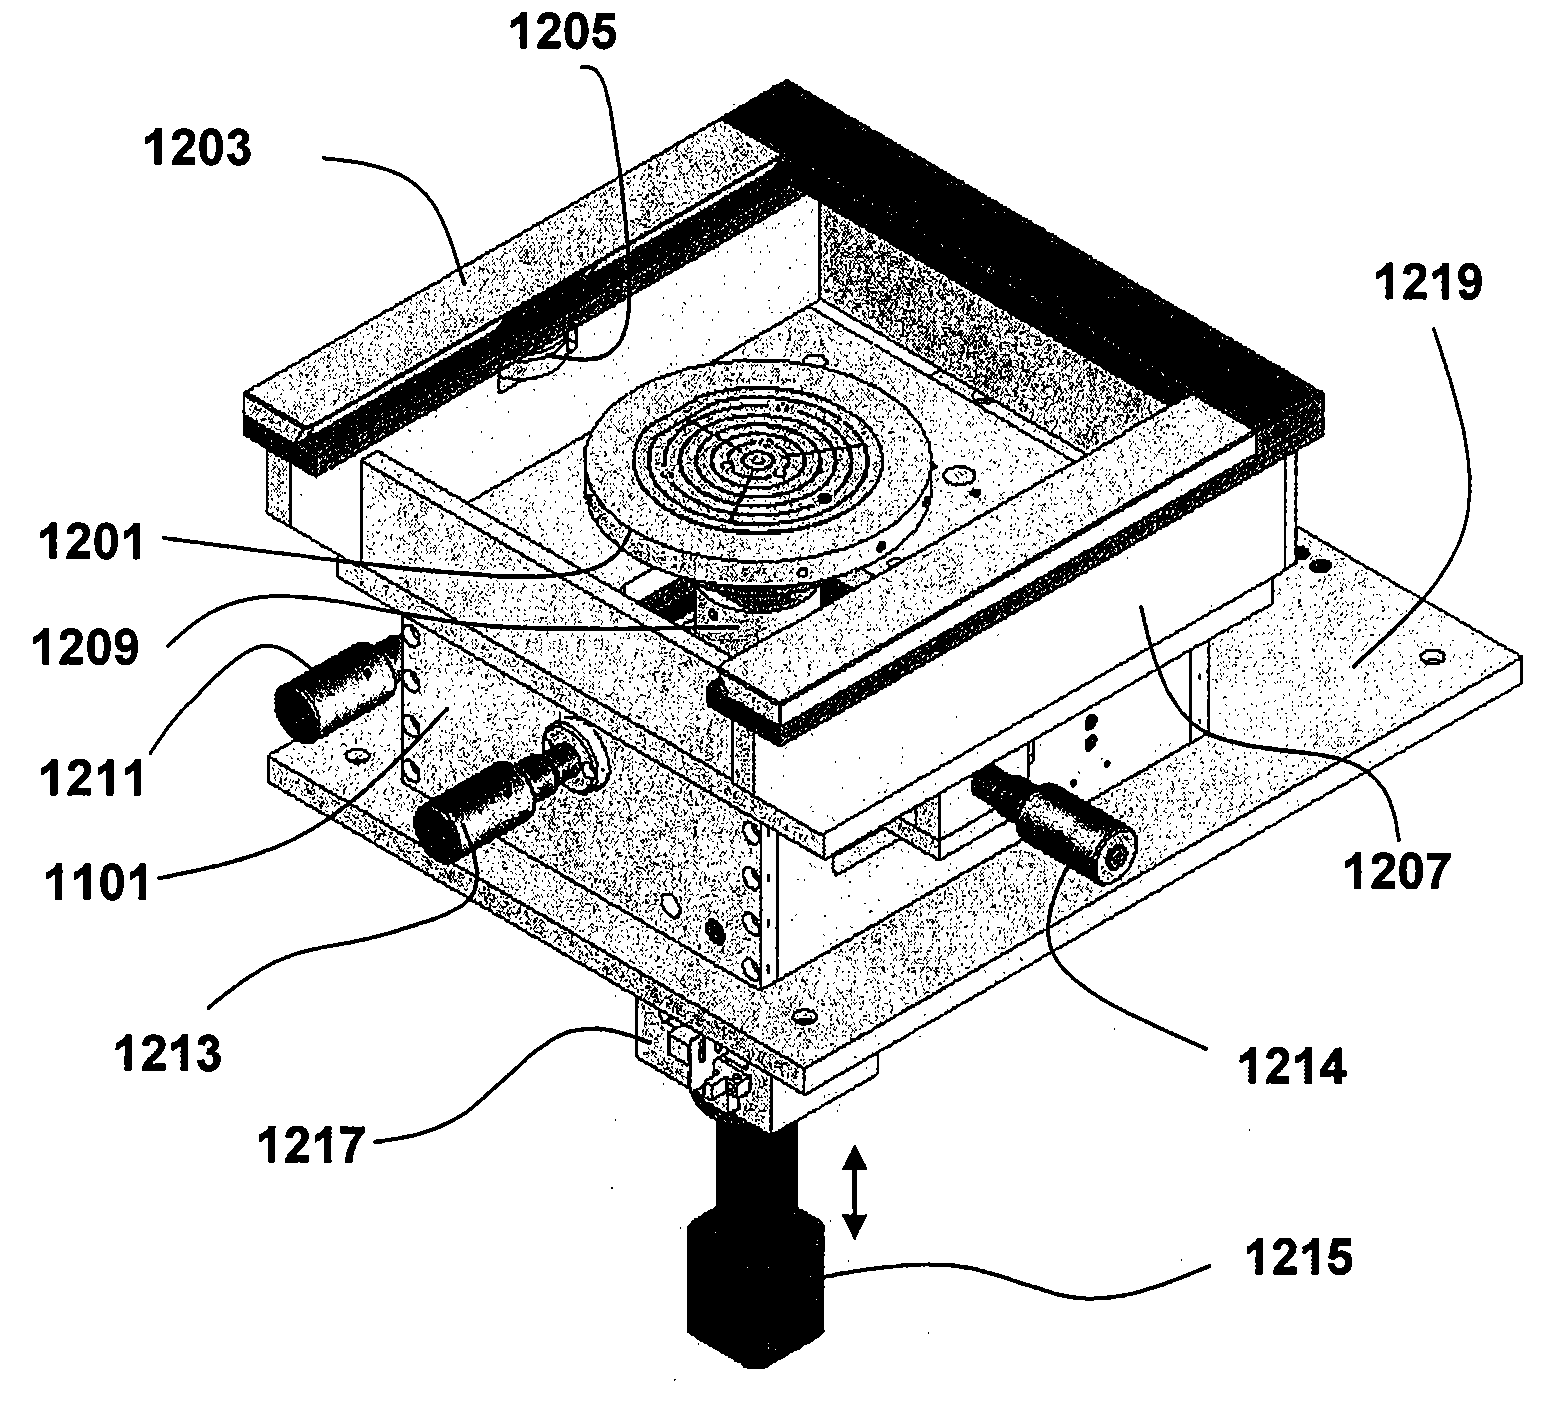 Align-transfer-imprint system for imprint lithogrphy